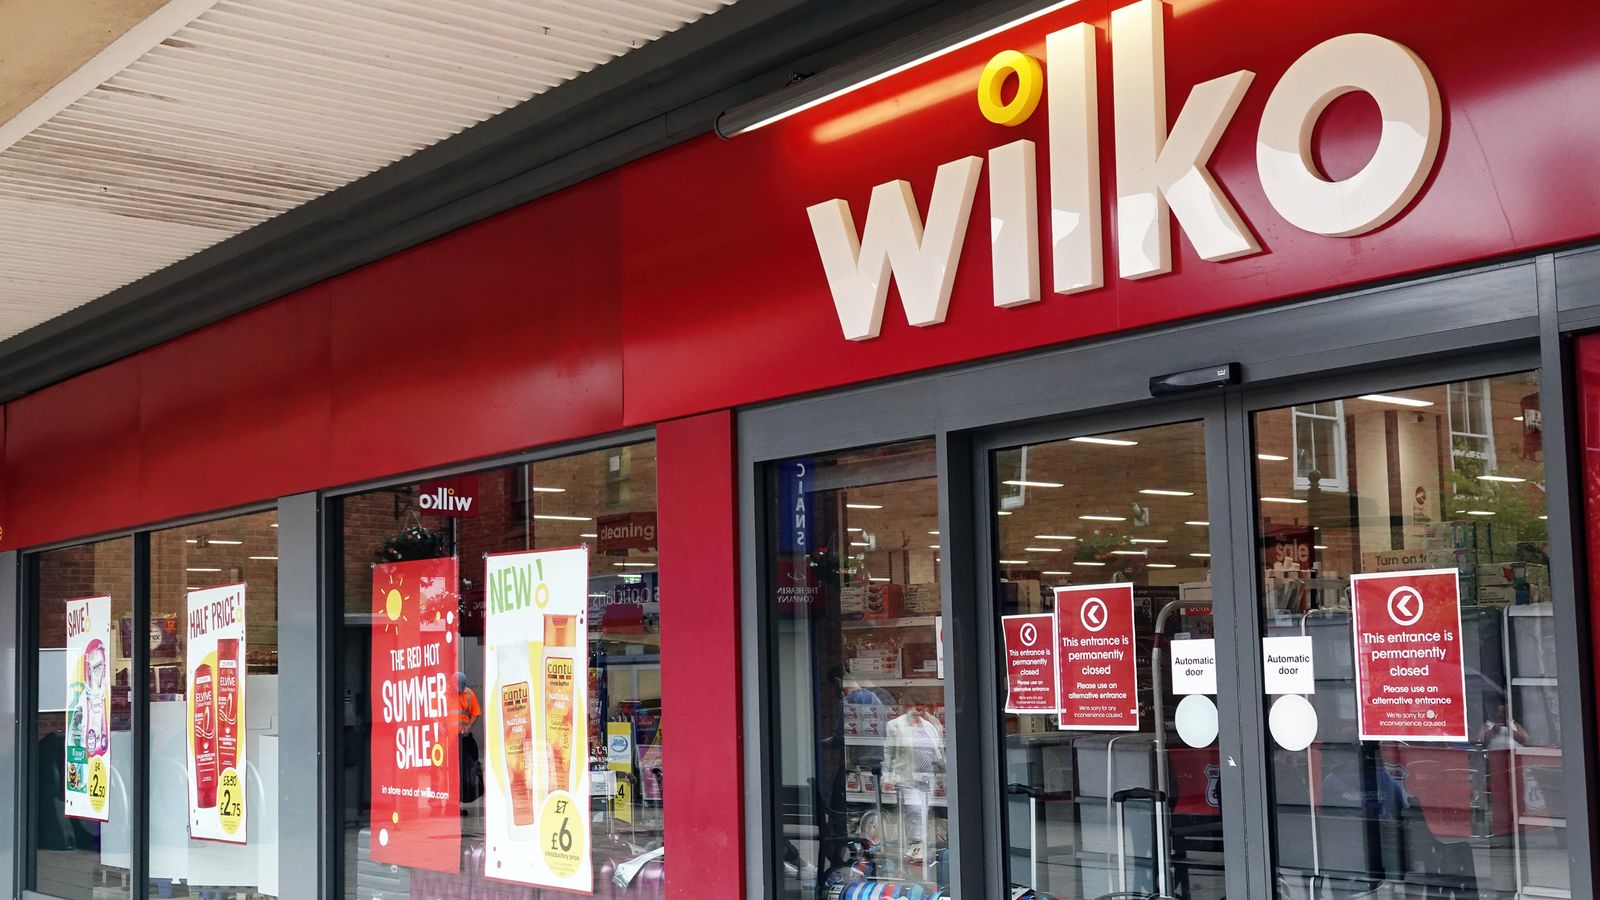 Some 12,000 jobs at risk as UK retail chain Wilko on brink of collapse